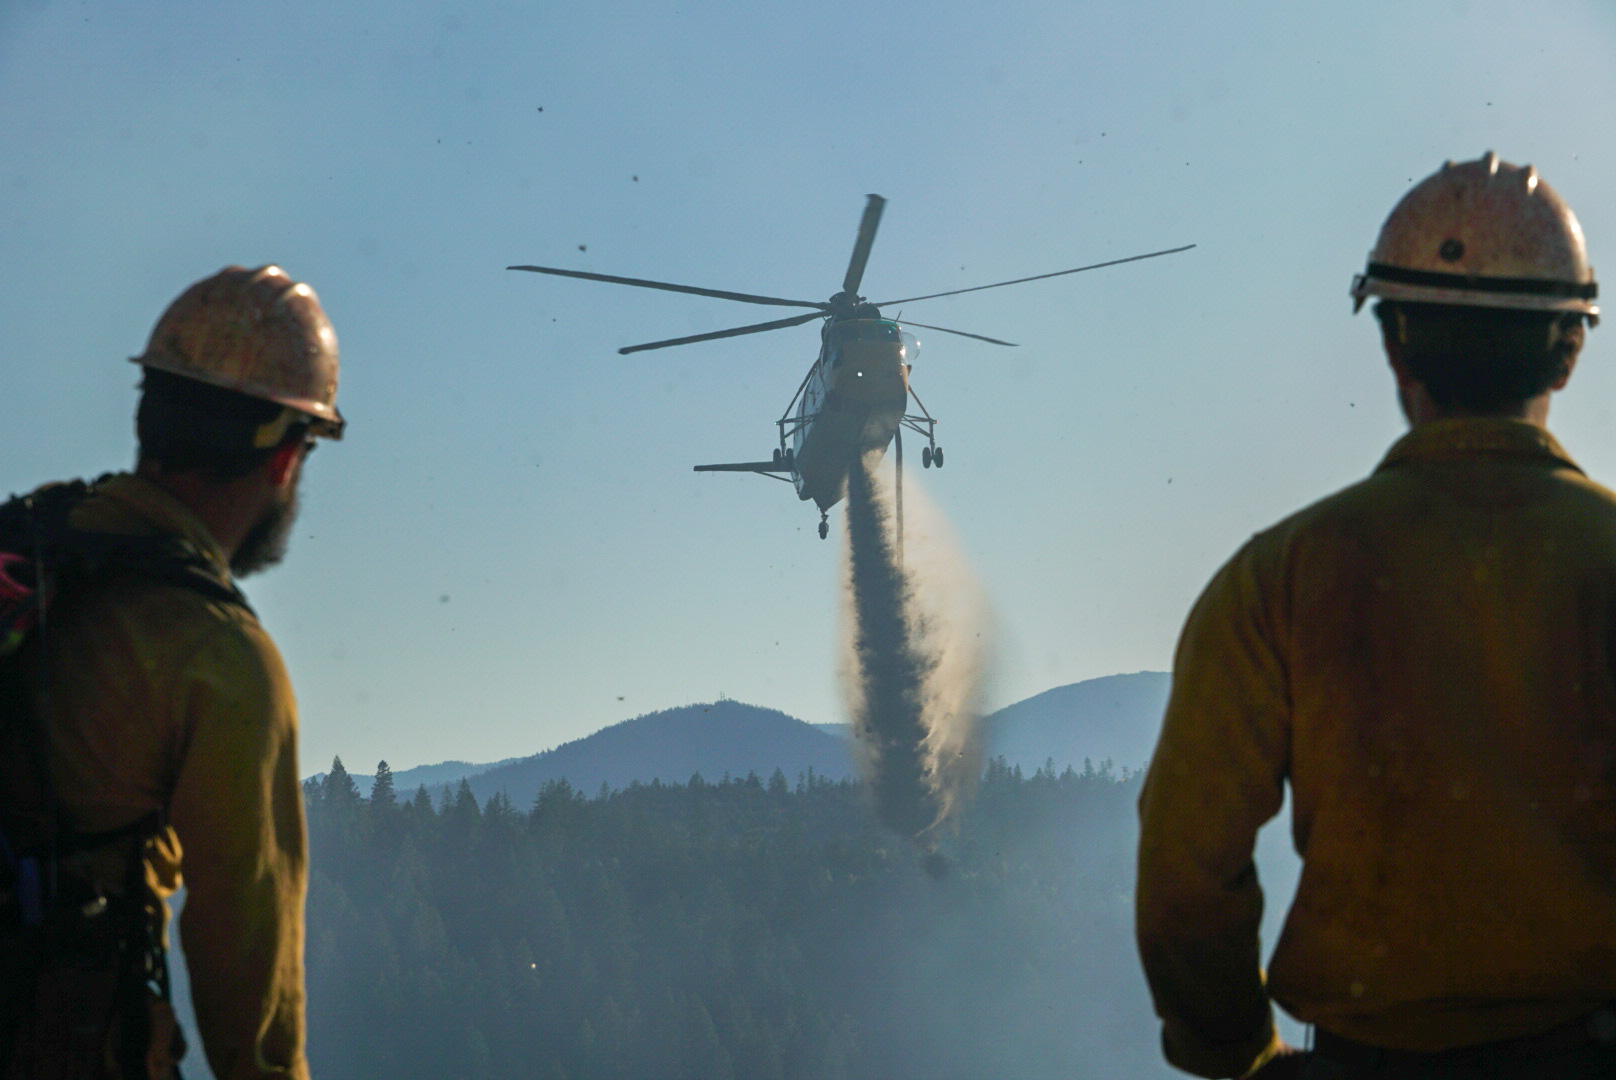 Crewmembers watch a large helicopter drop water.